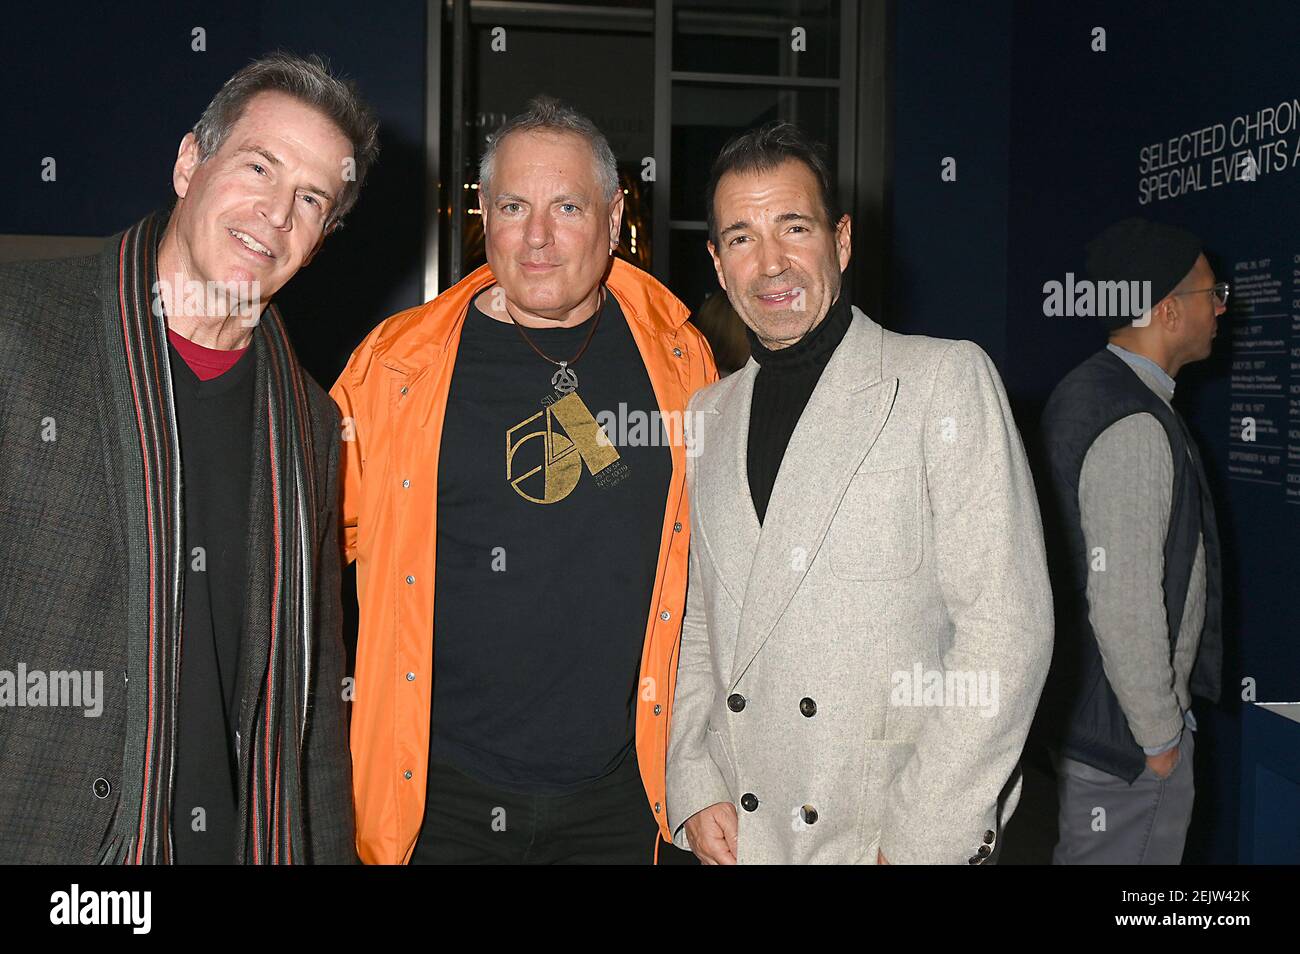 LJ Kirby, Timothy Bascom and Richie Notar, former bartenders at Studio 54  attends The Brooklyn Museum's Opening Reception for Studio 54: Night Magic  on March 11, 2020 in Brooklyn, New York, USA.